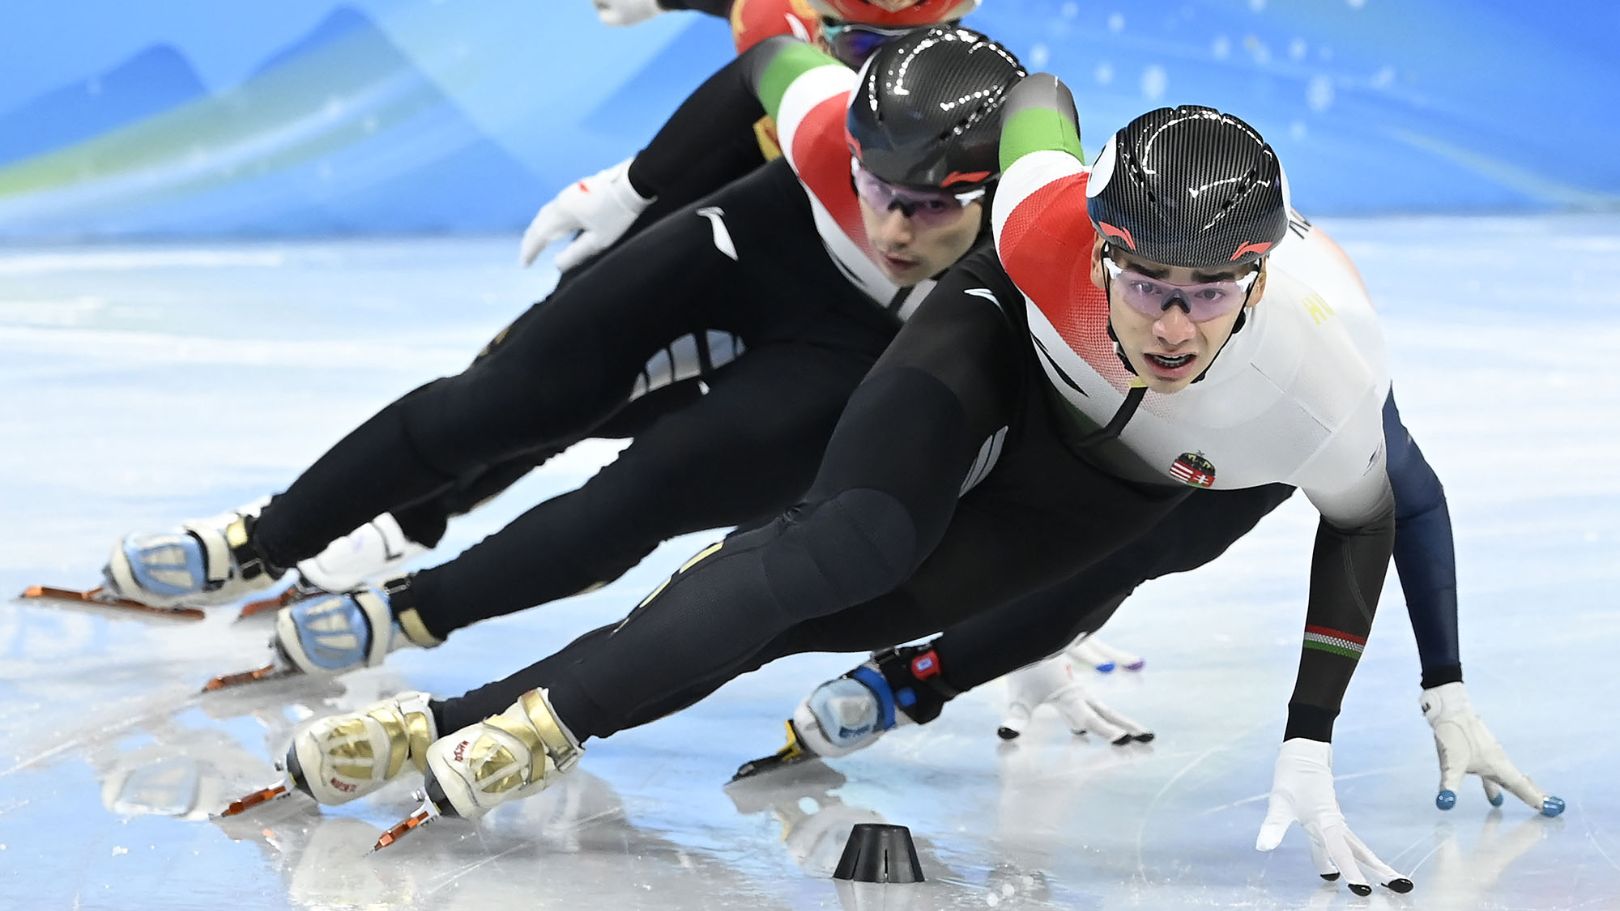 Watch: Row Over Hungary’s Lost Winter Olympics Gold